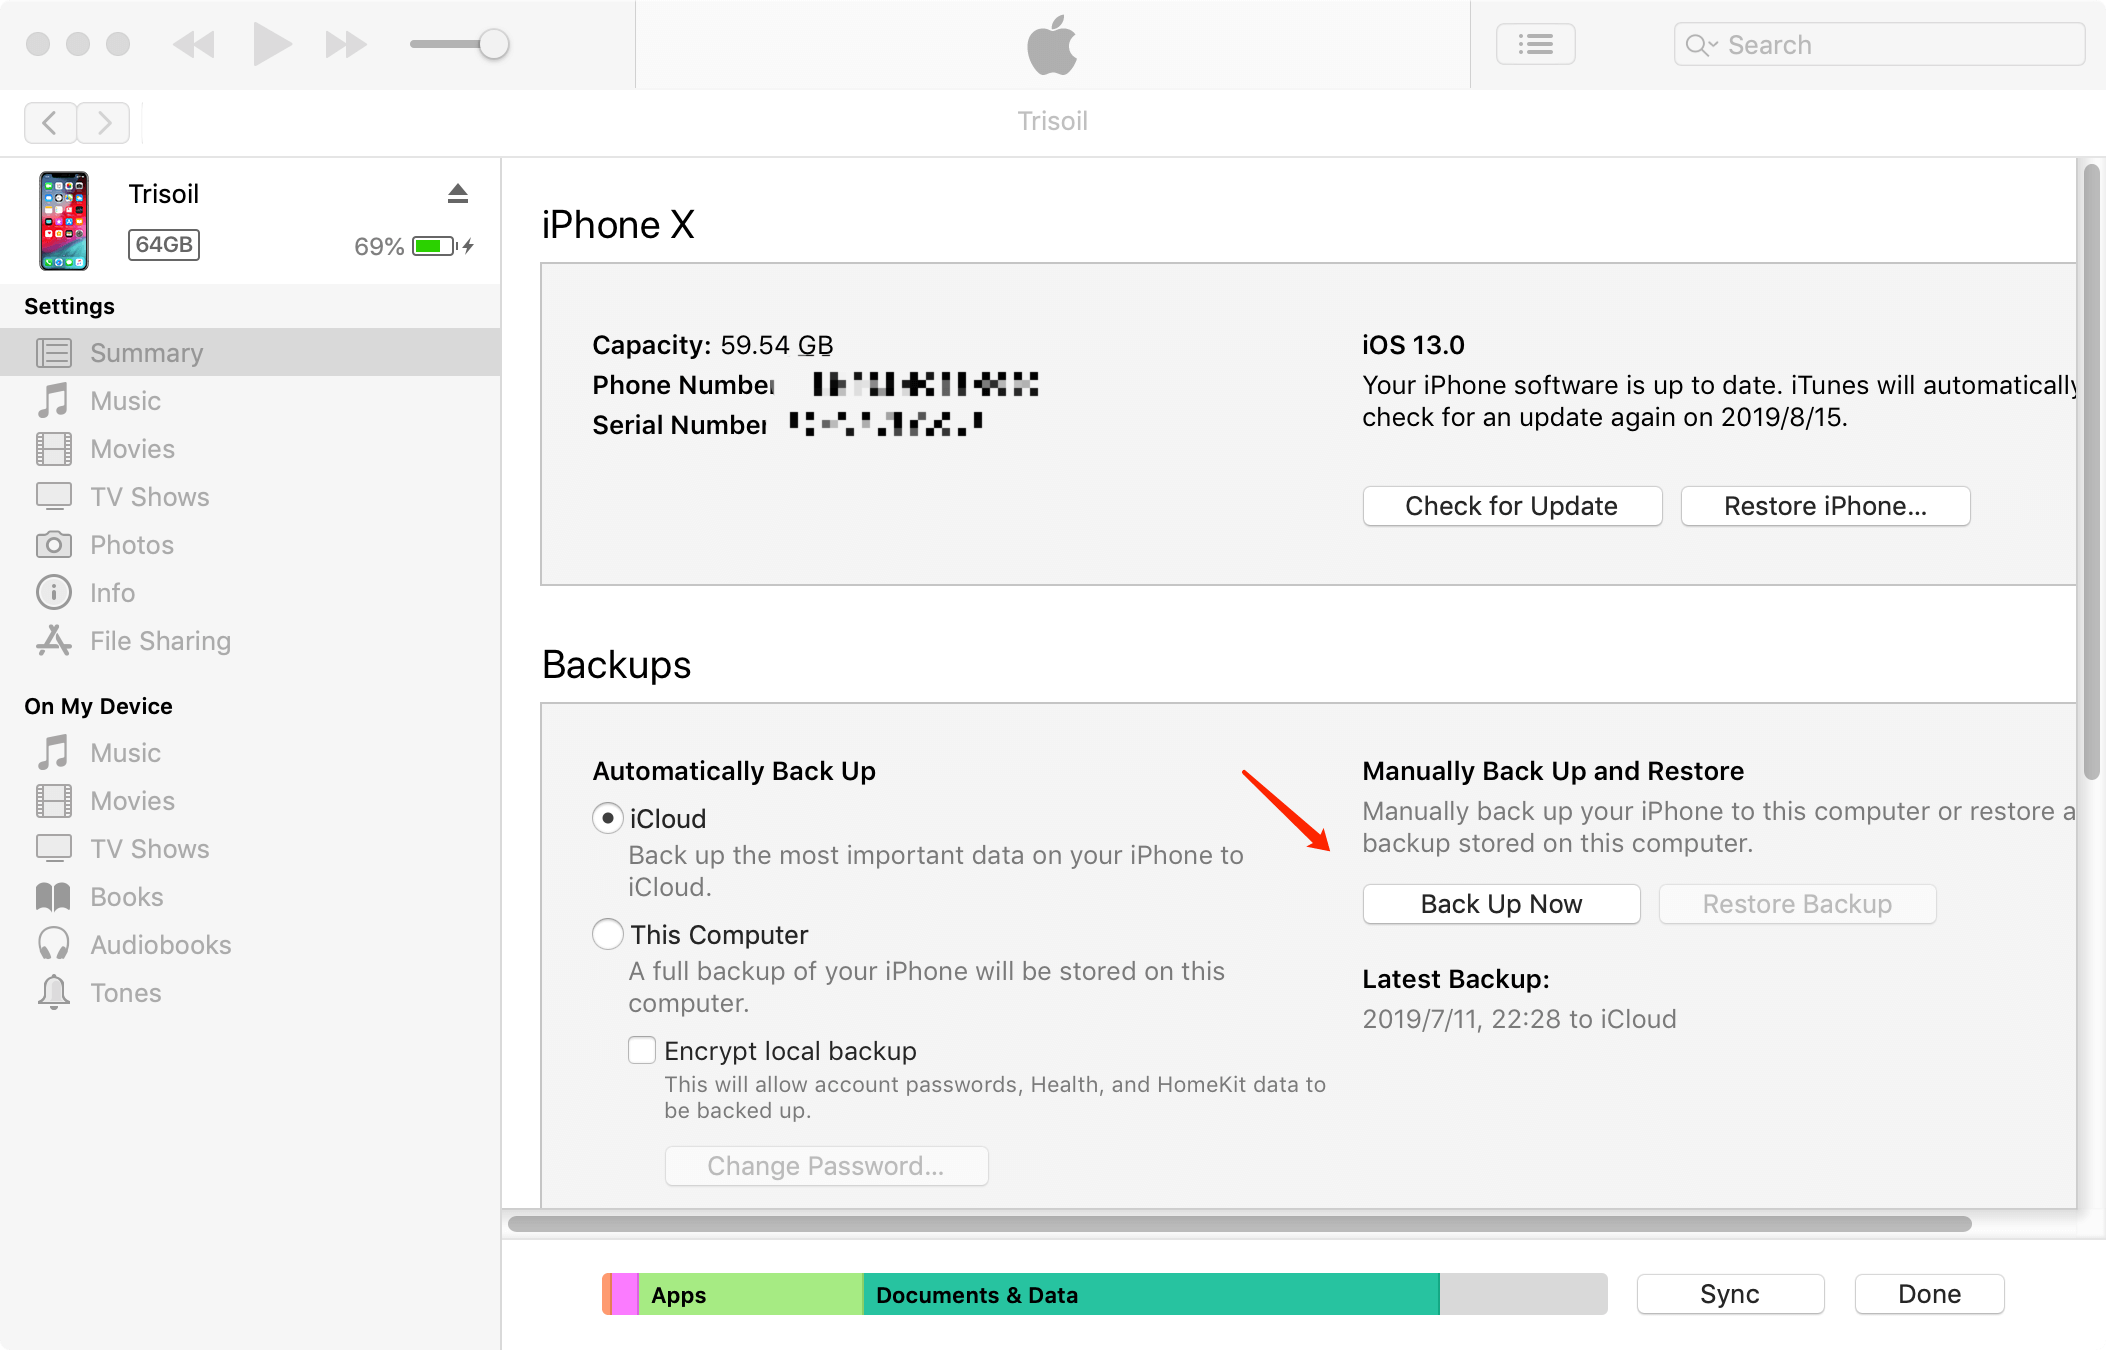 How to back up with iTunes？